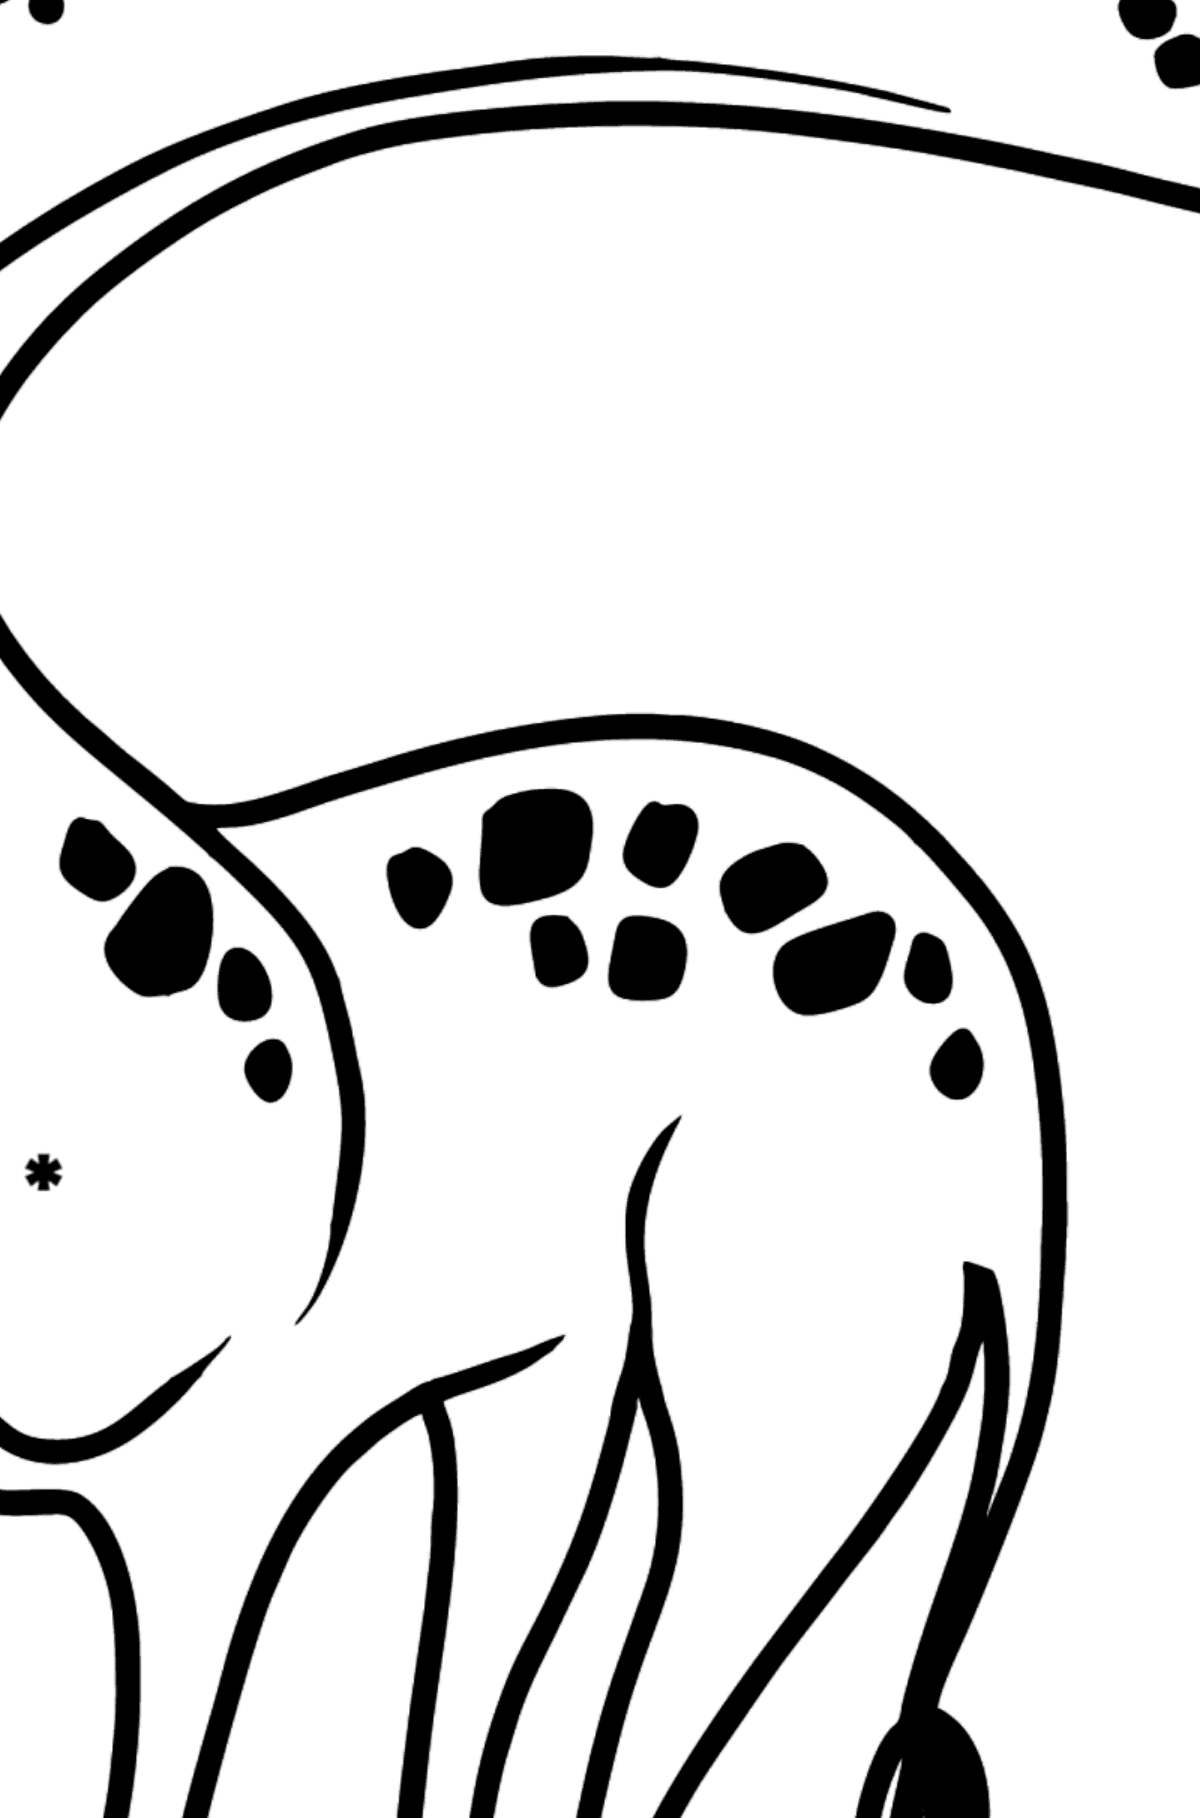 Giraffe coloring page - Coloring by Symbols for Kids